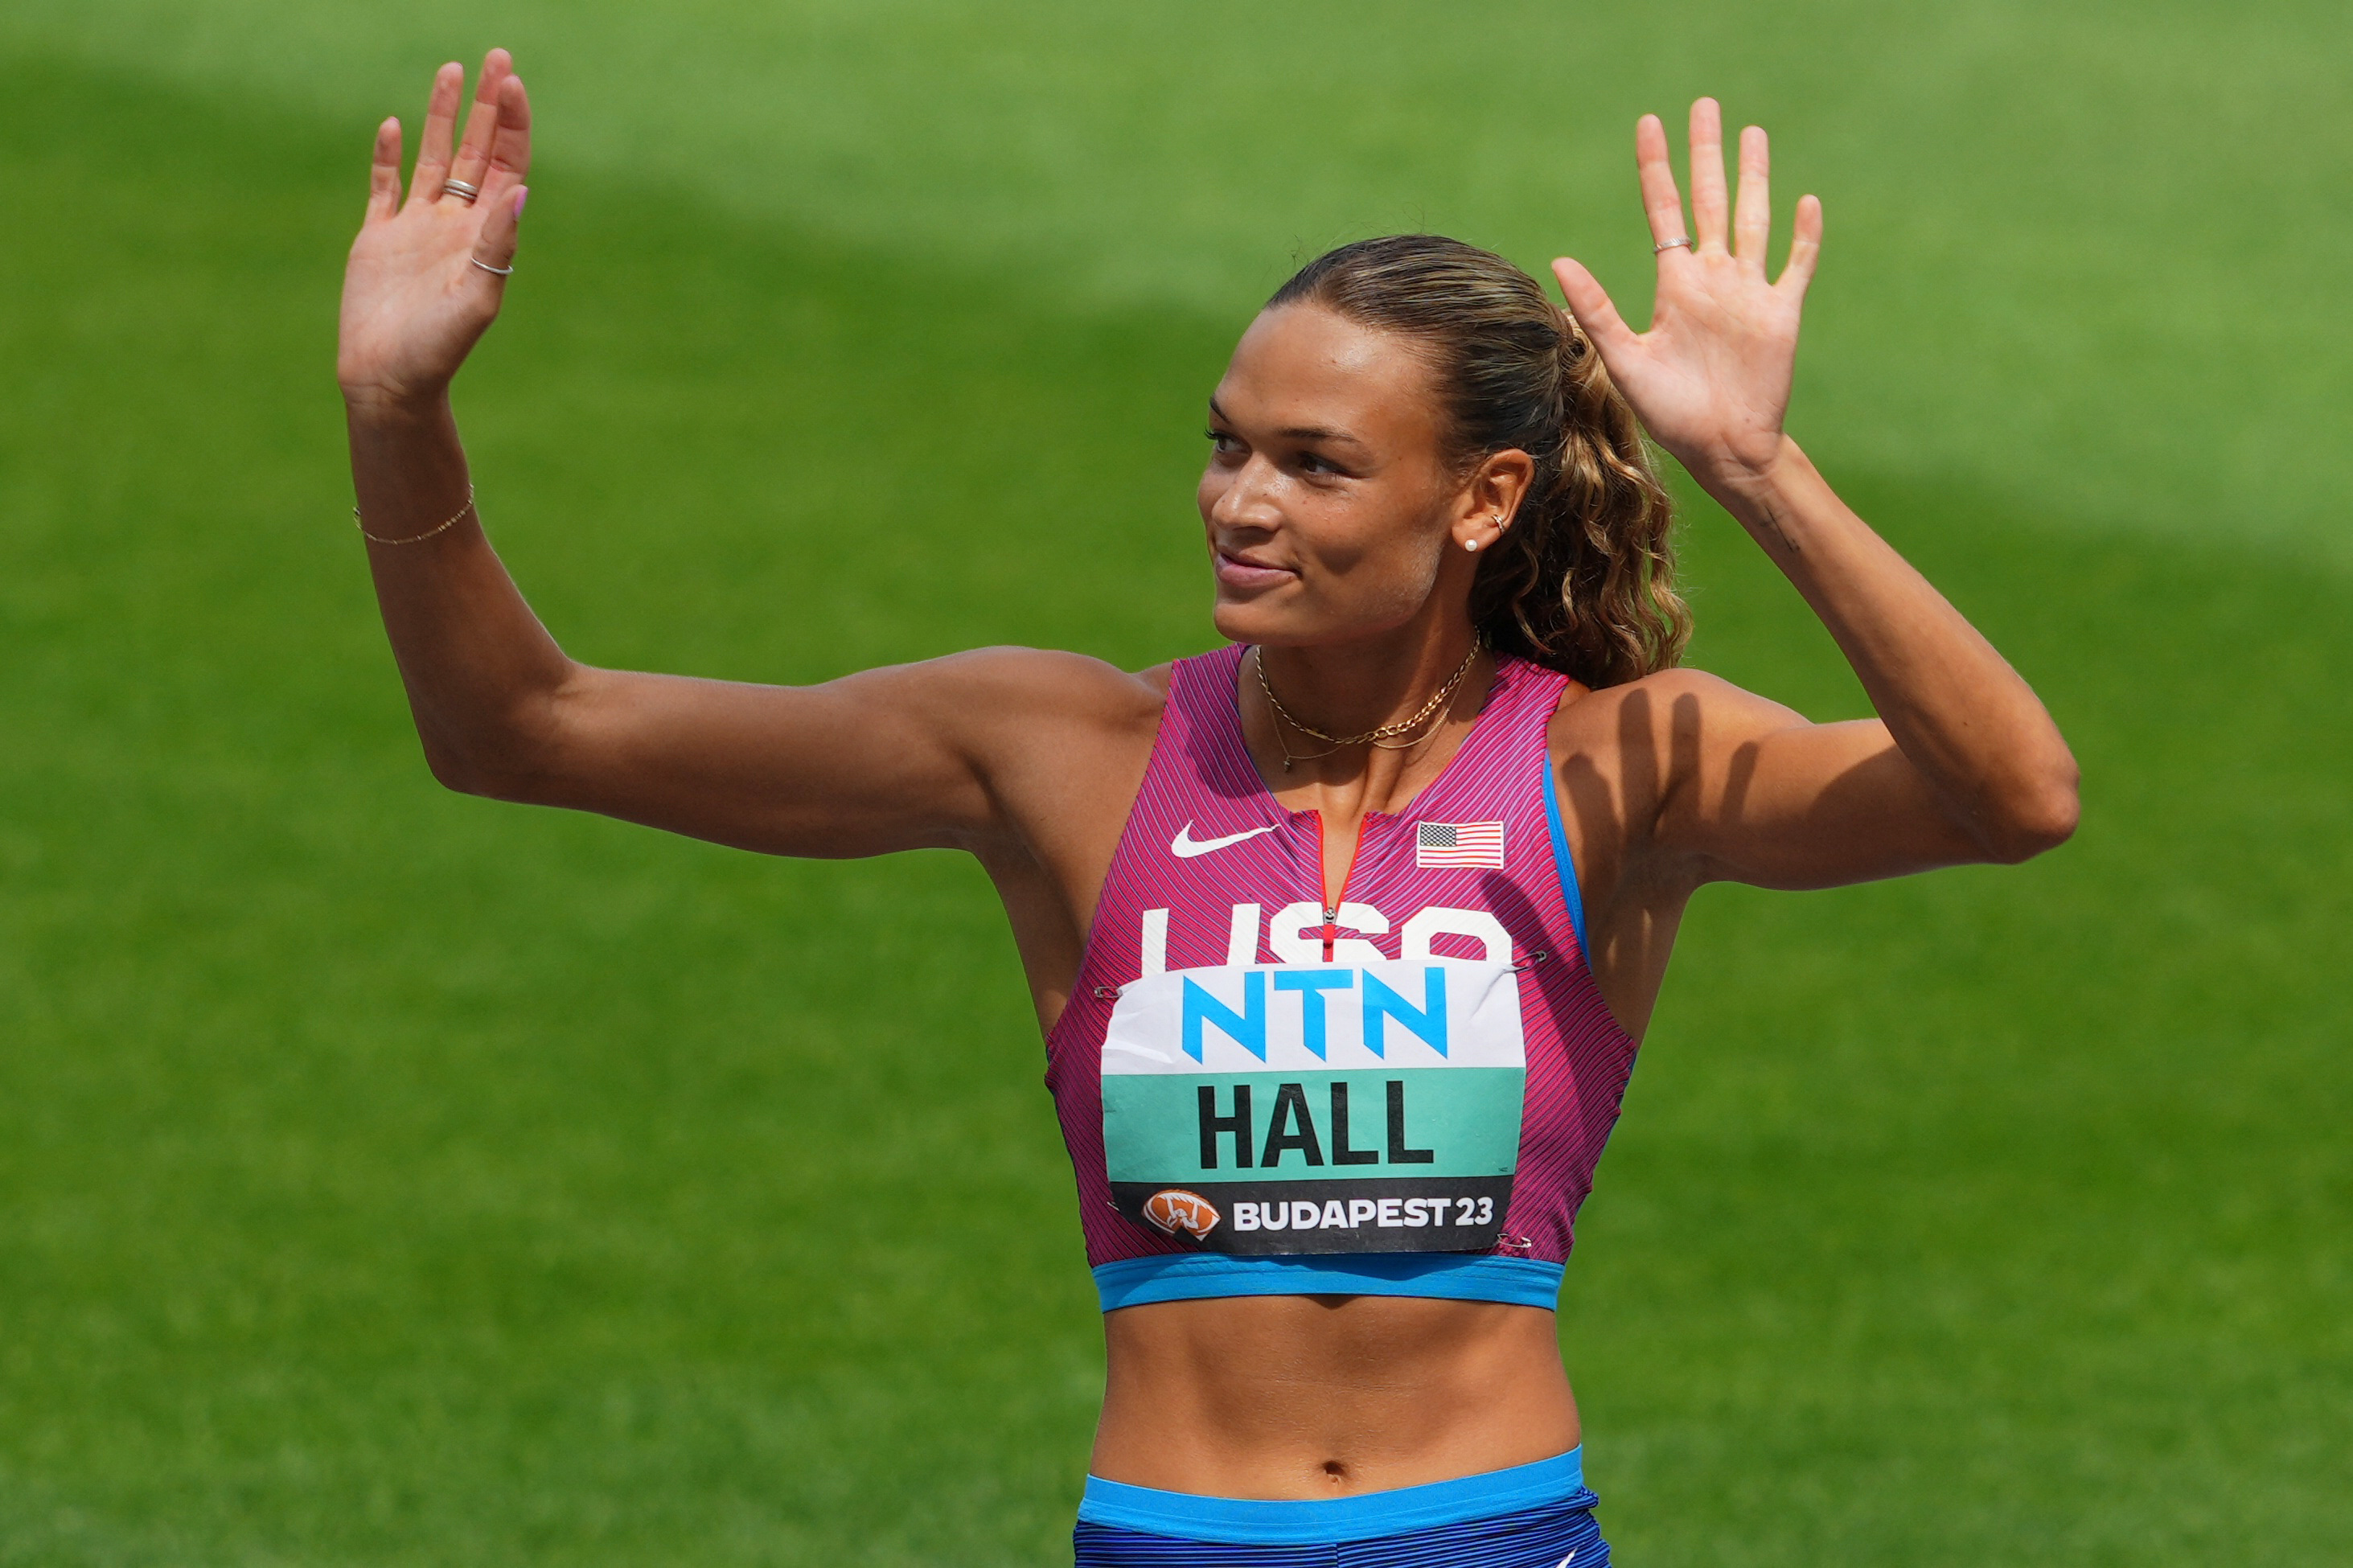 Women's heptathlon: United States' Anna Hall in 3rd place after